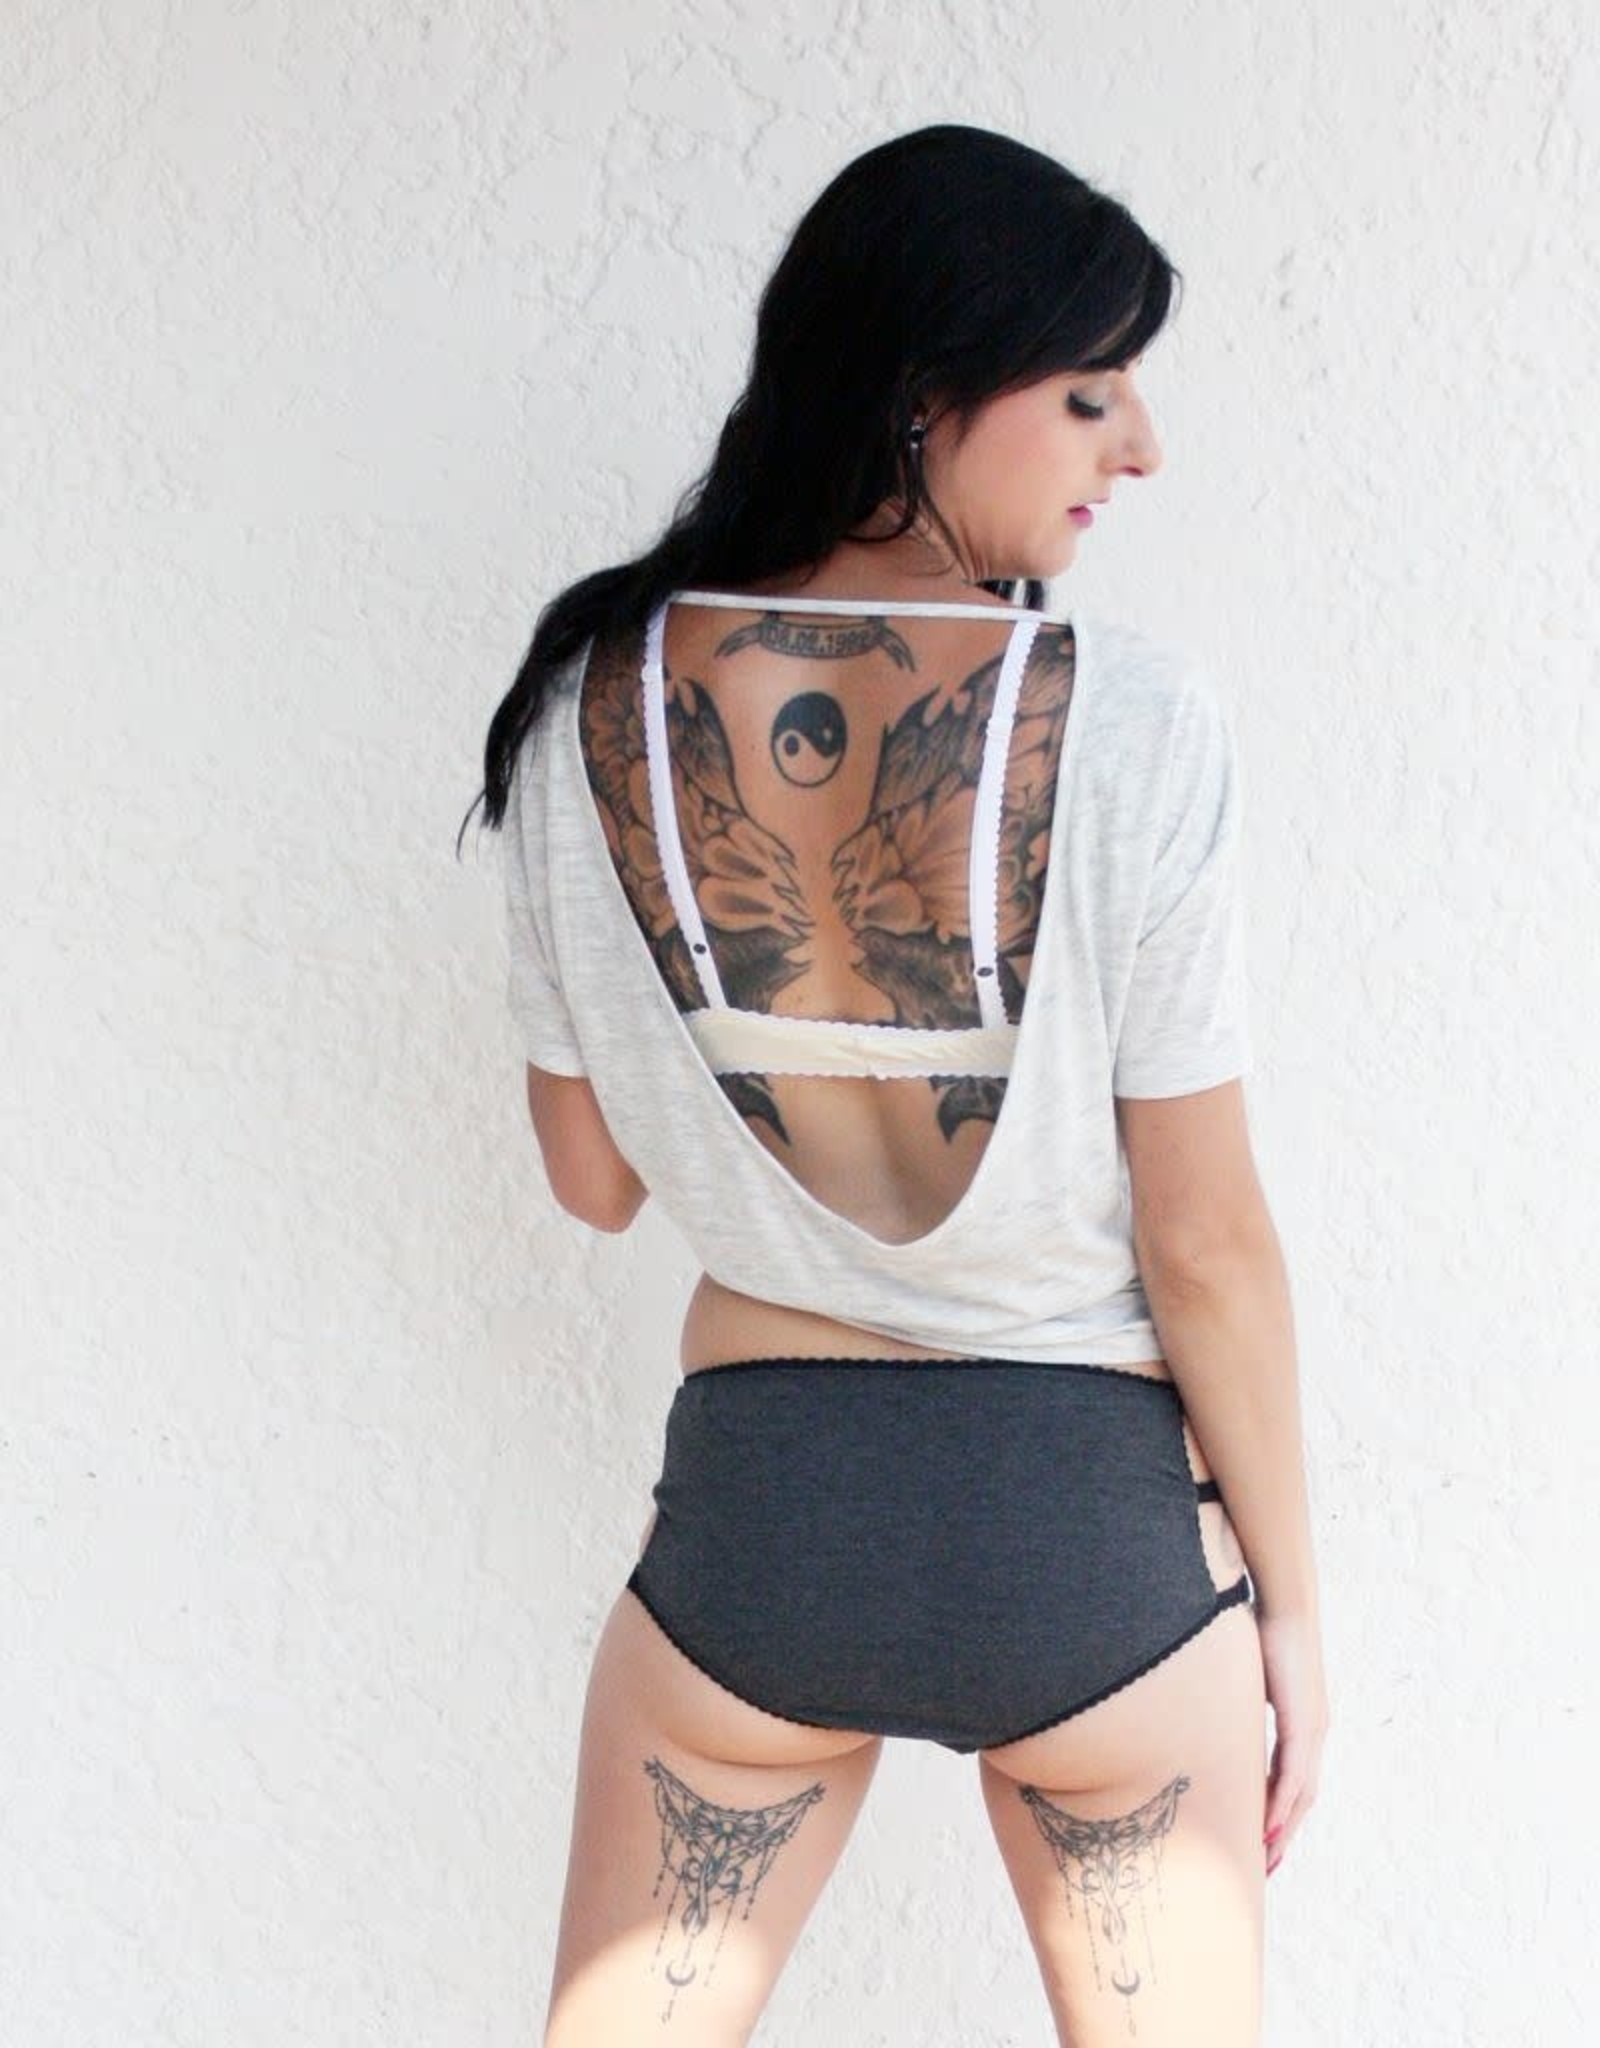 Devil May Wear Cage Panties. Bamboo blend. Adjustable size tabs. Mid Rise. Heather Grey/Black